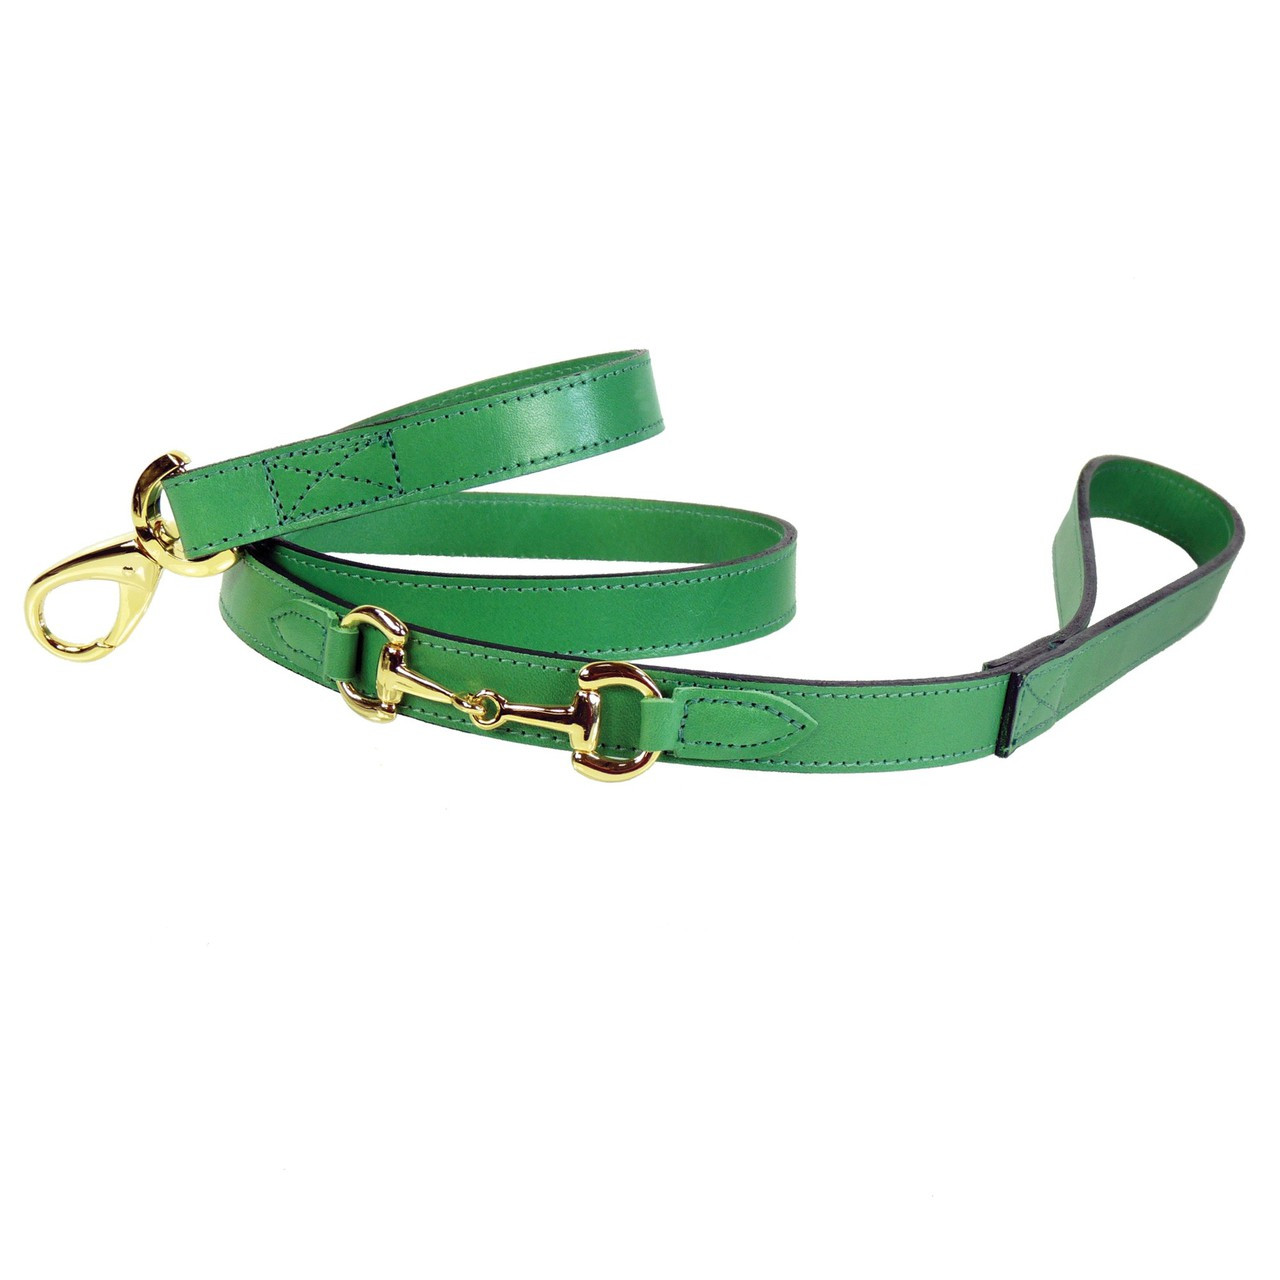 Belmont Lead in Kelly Green & Gold - (22 Colors) - Top Notch Pet Products